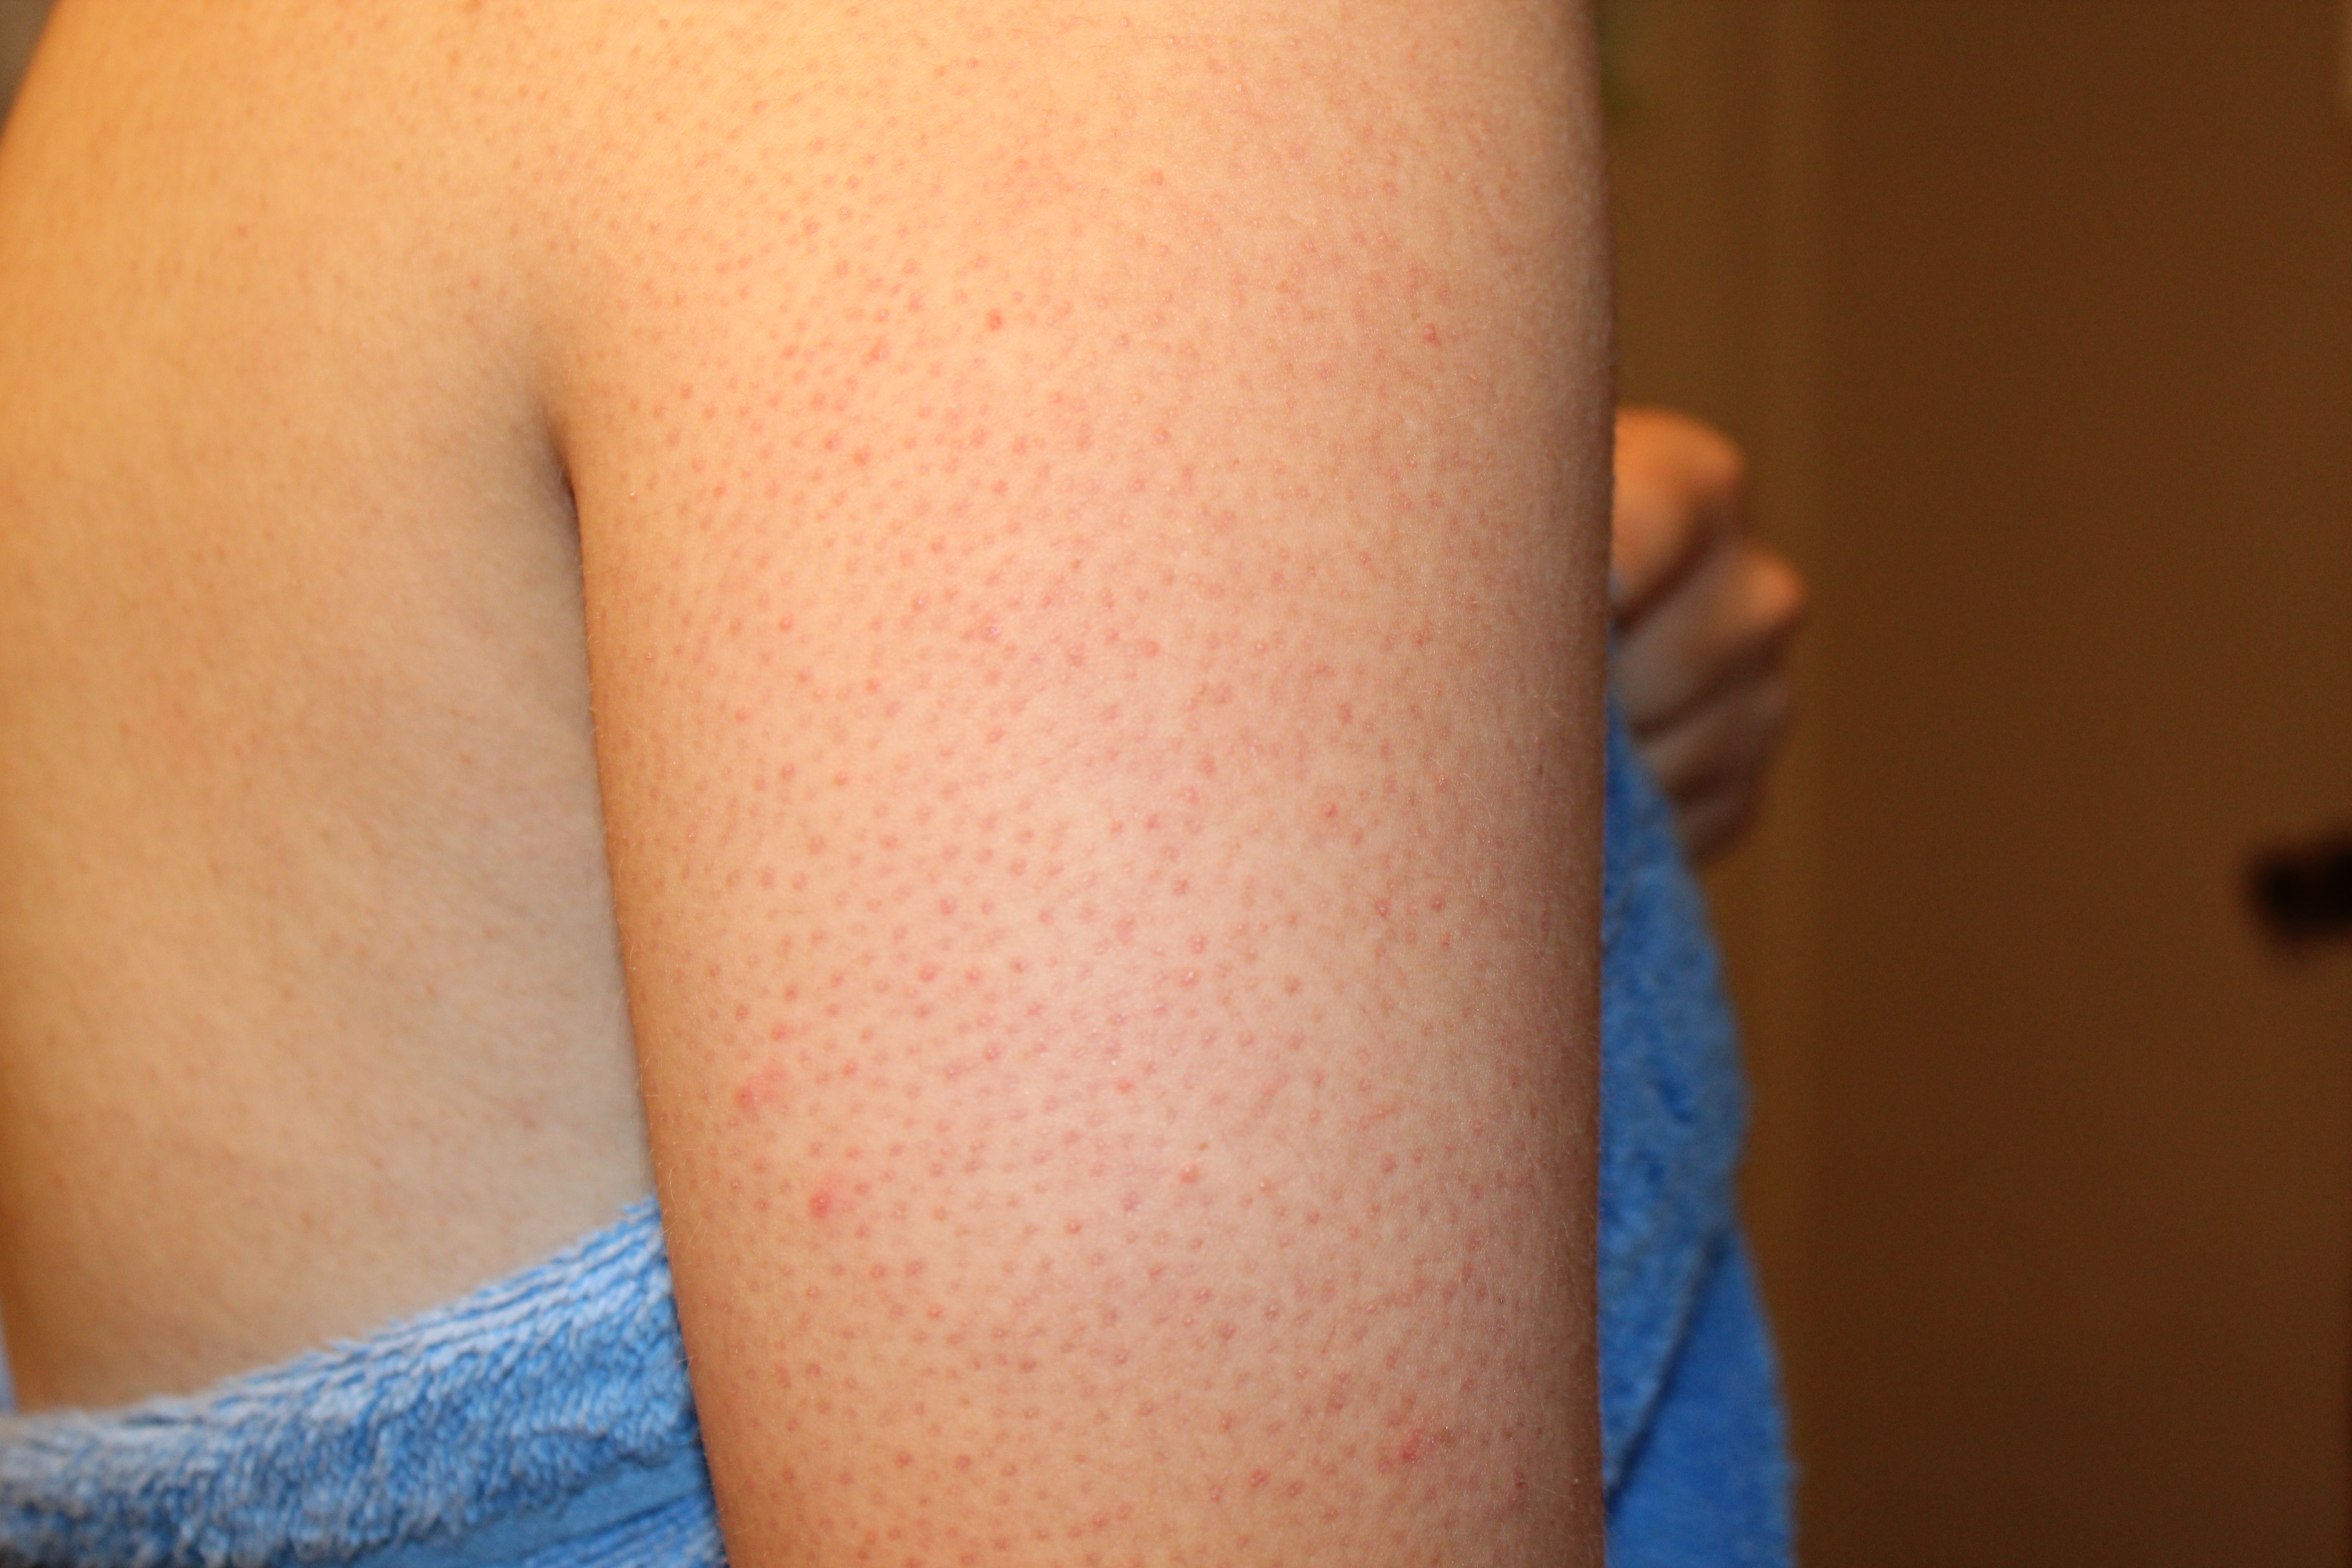  skin, sugar pimples, white arm bump things, or incorrectly diagnosed